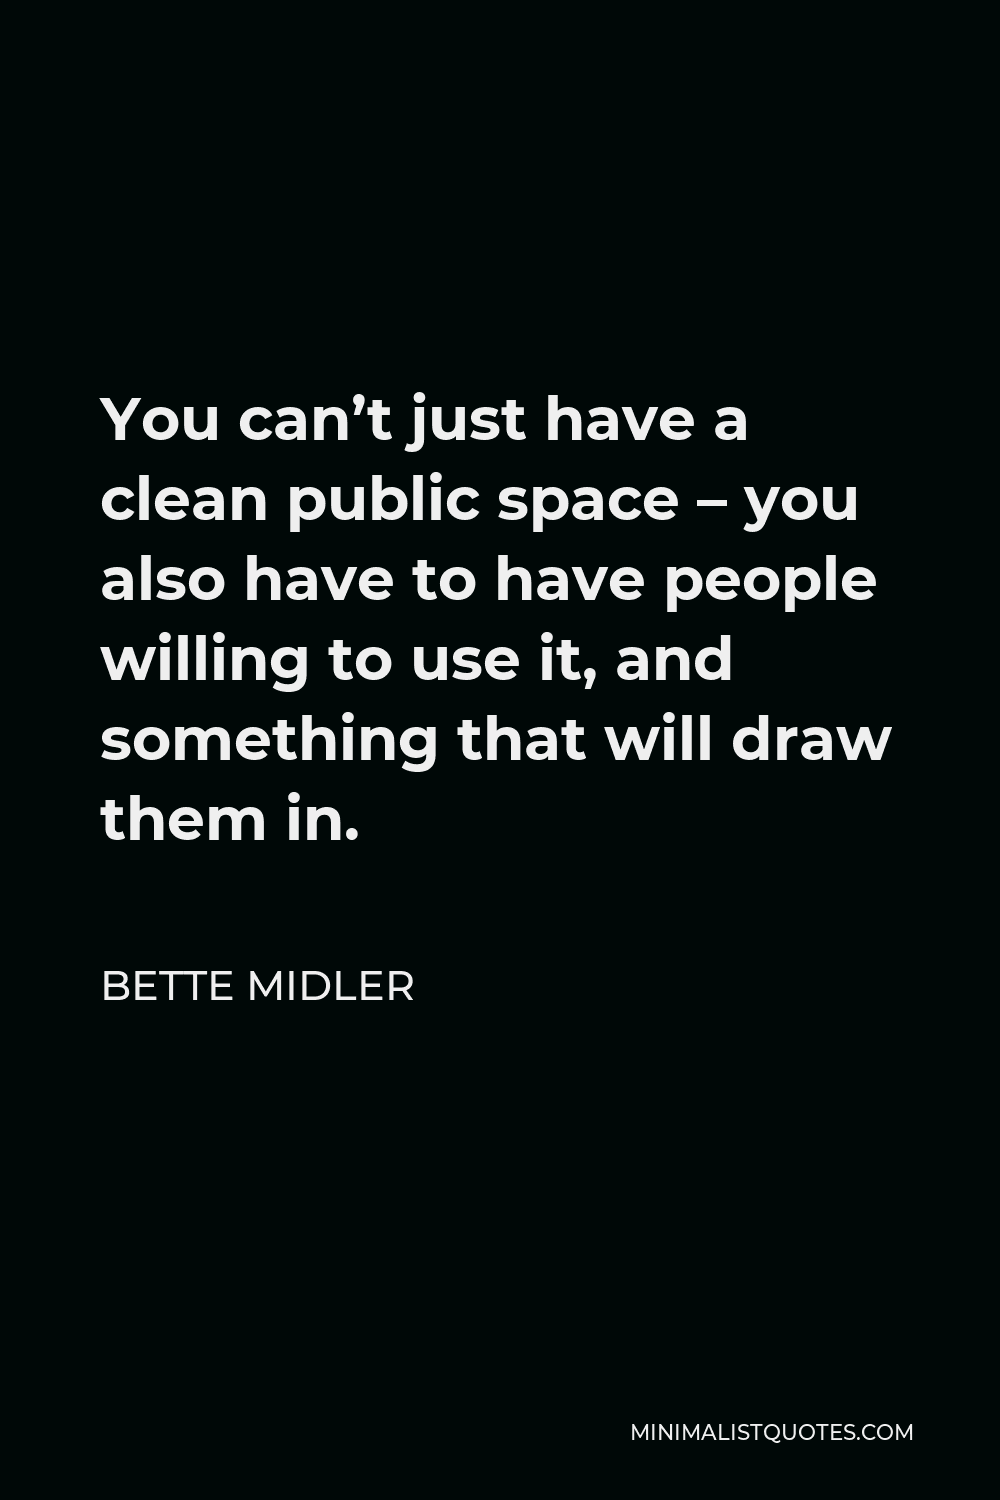 Bette Midler Quote - You can’t just have a clean public space – you also have to have people willing to use it, and something that will draw them in.